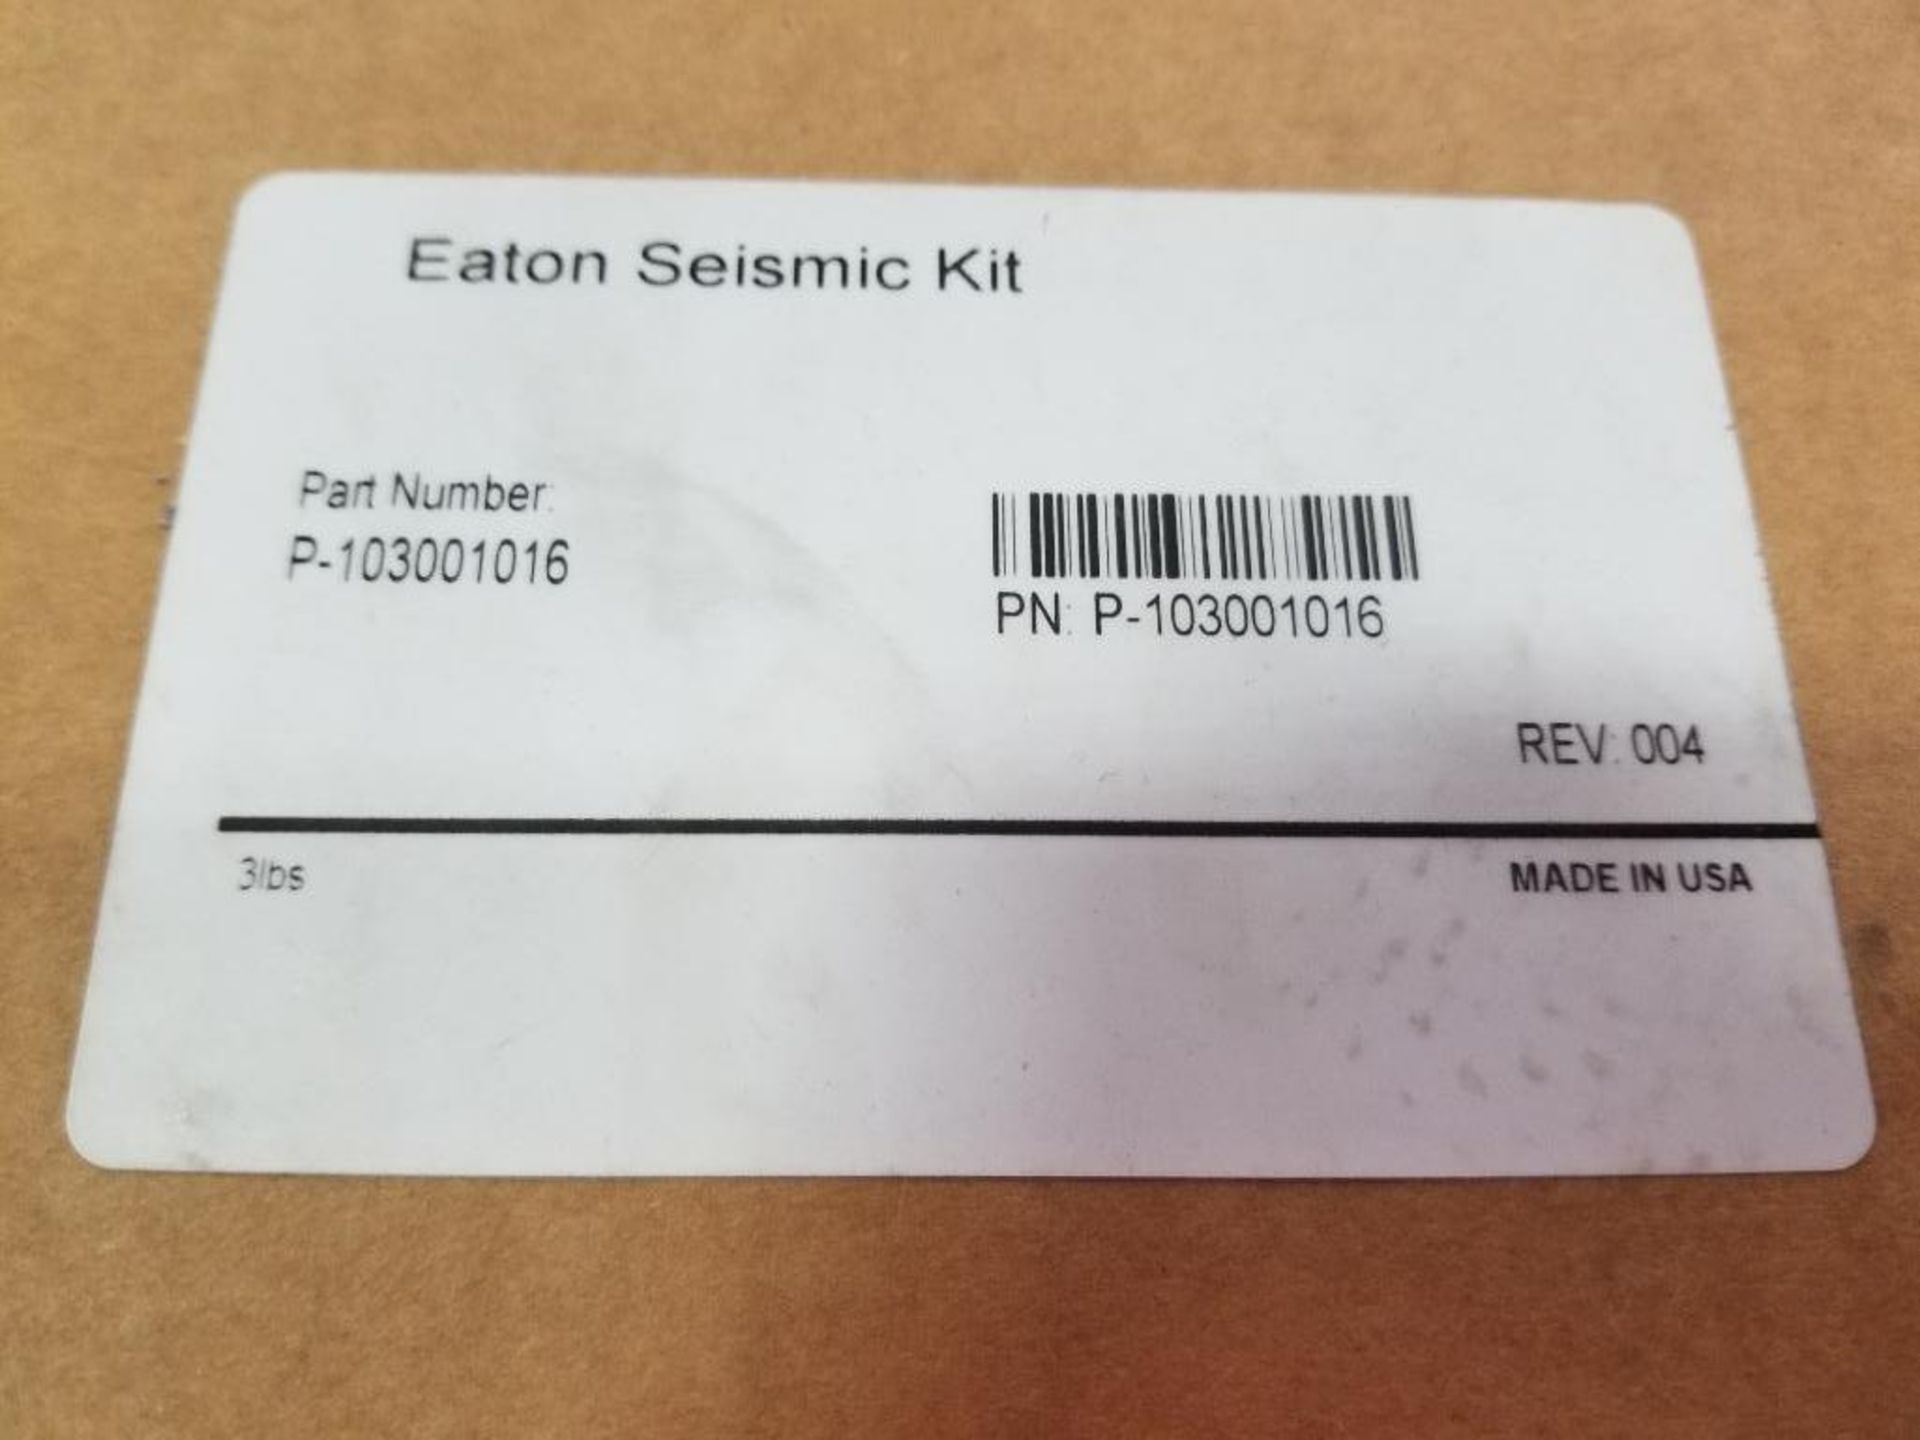 Qty 2 - Eaton Seismic Kit. Part number P-103001016. New in box. - Image 2 of 2